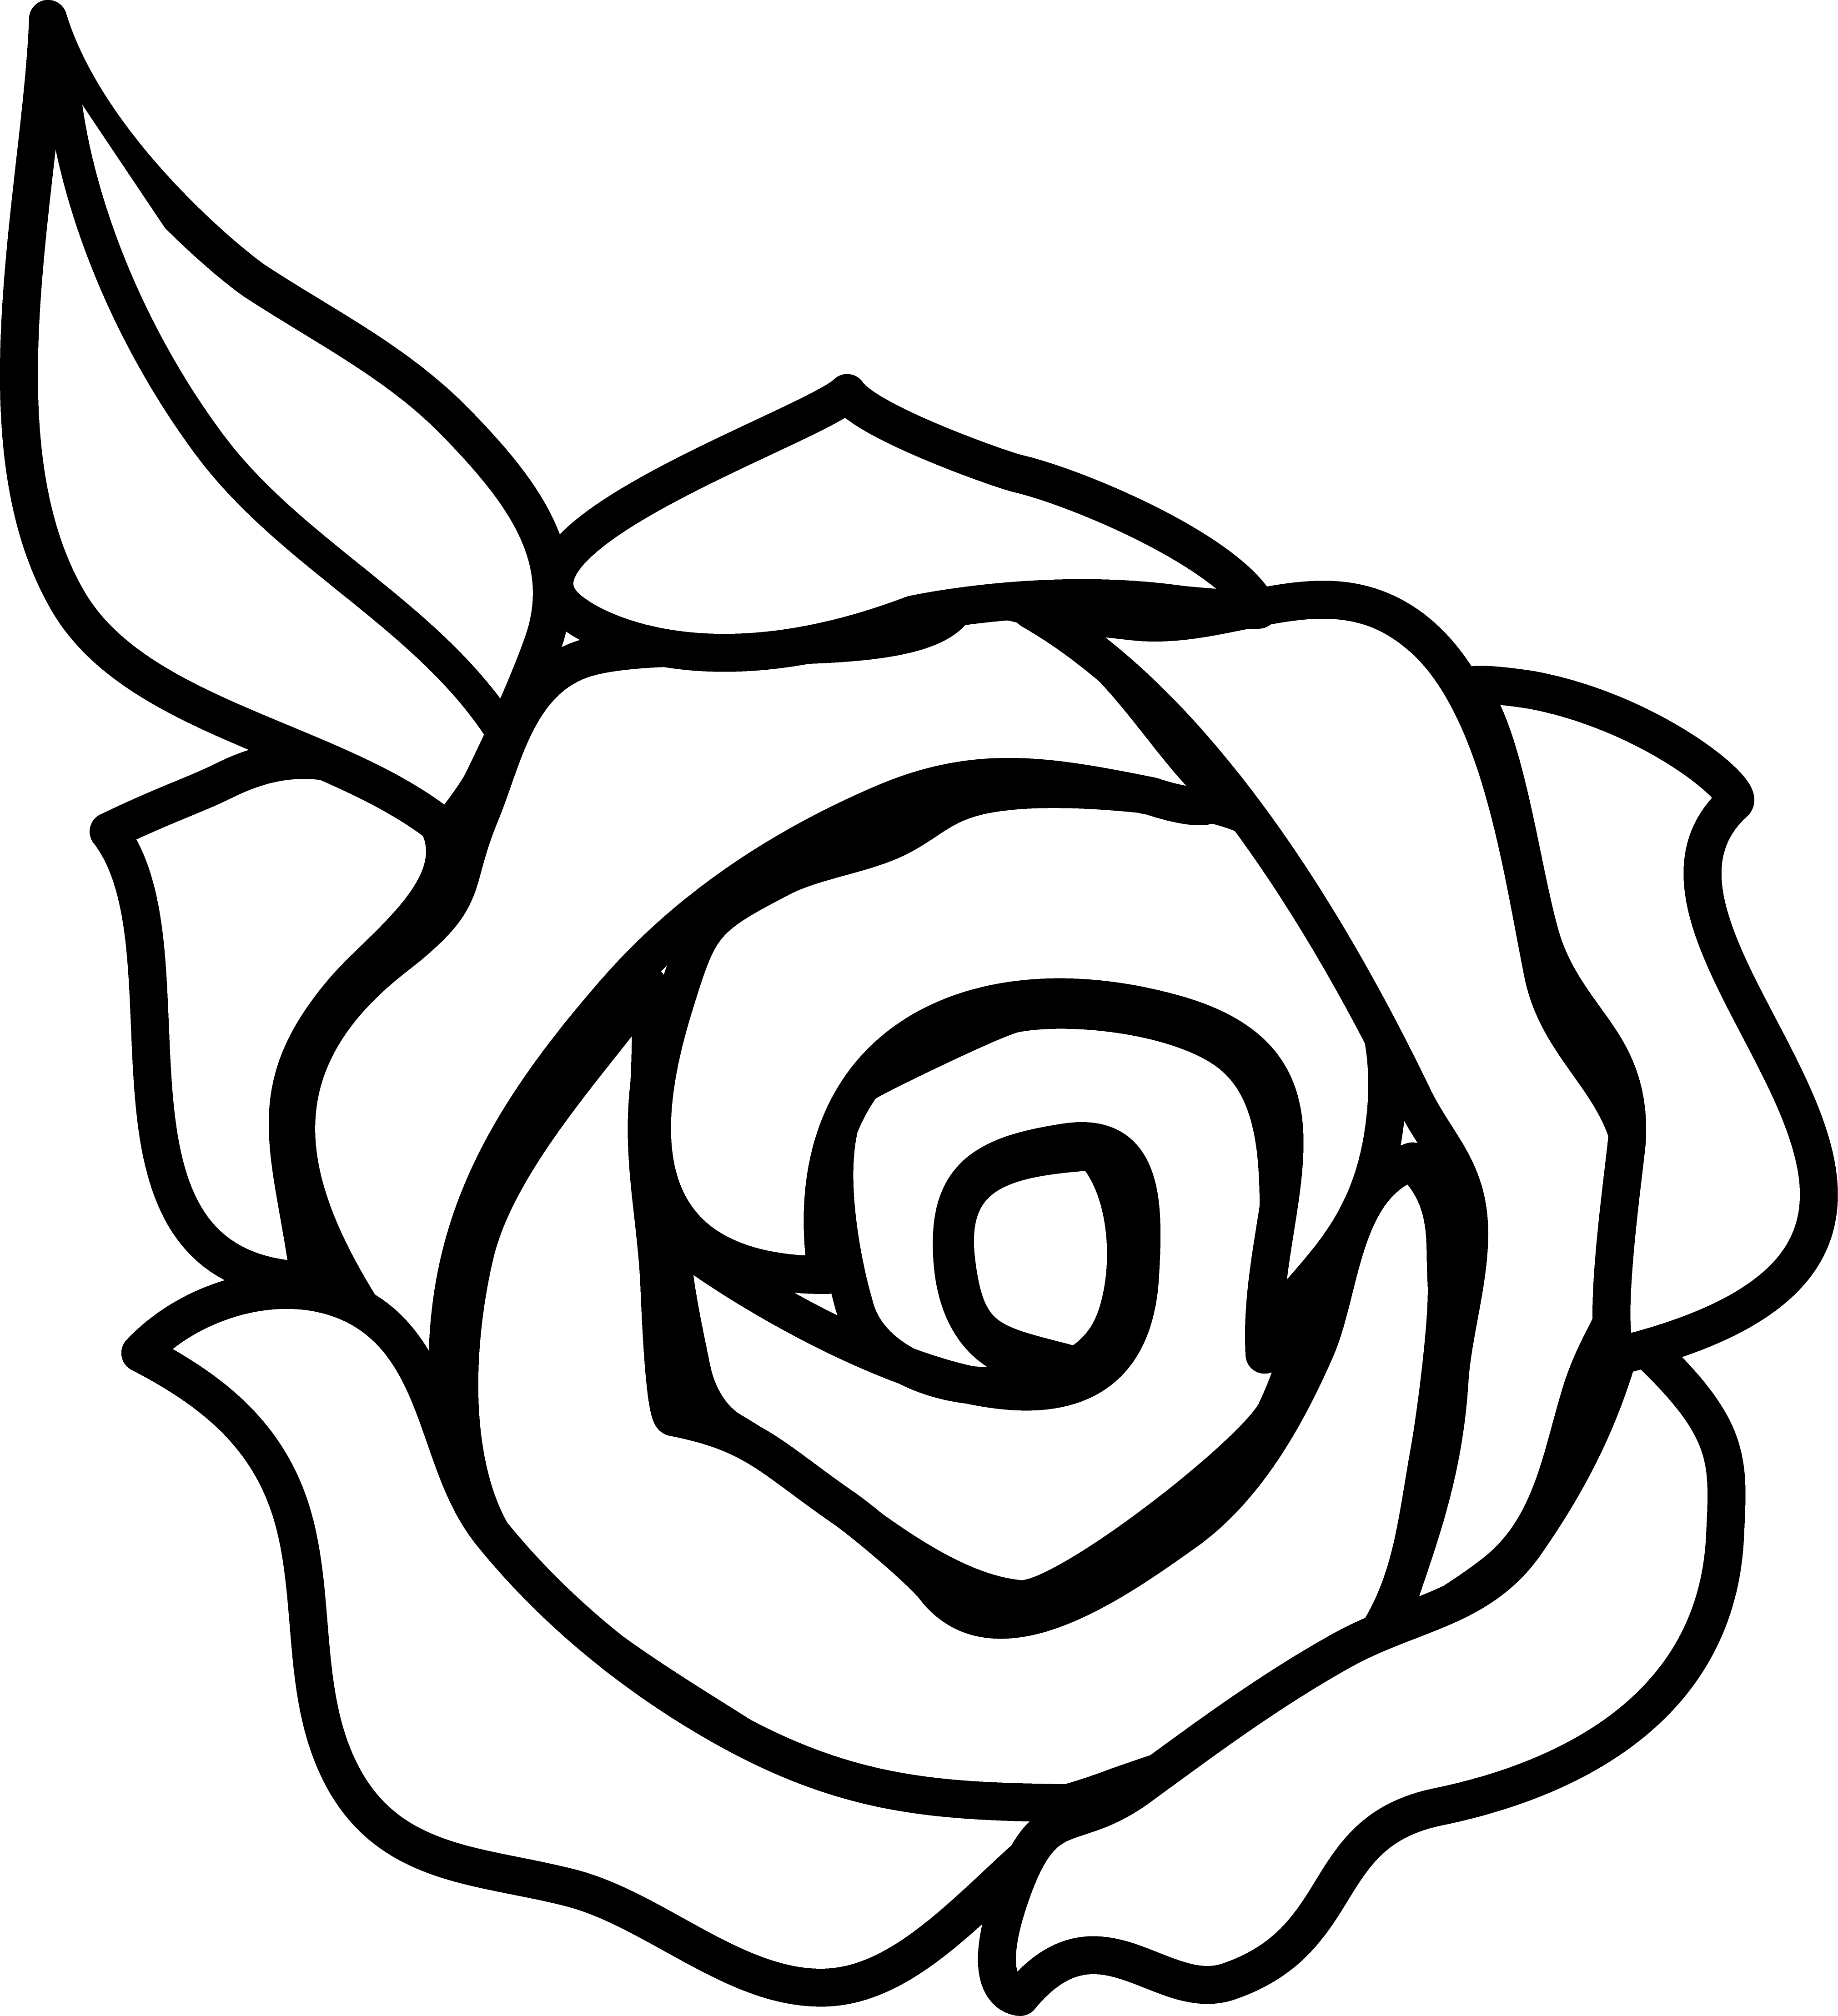 Clip Art Flower Black And White - Free Clipart Images